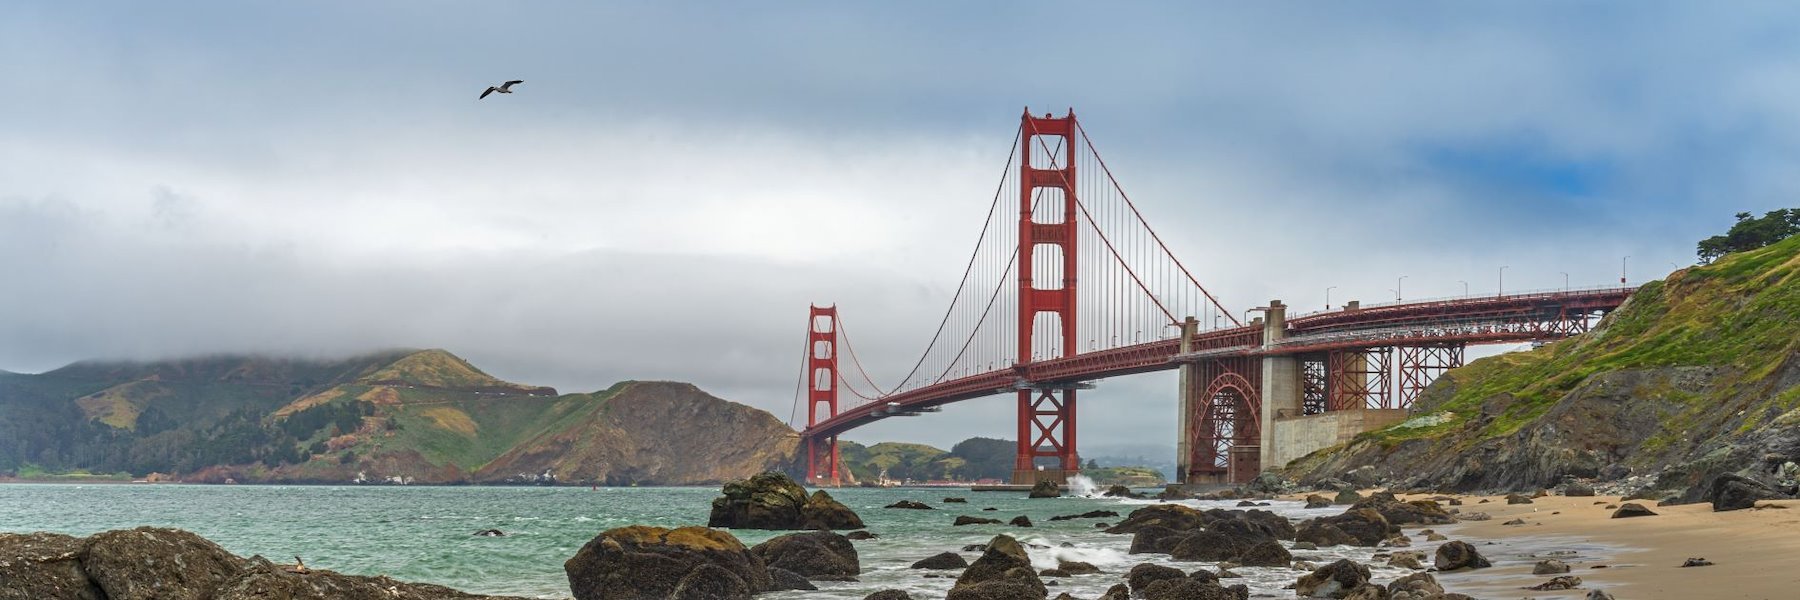 Nearby attractions of San Francisco California